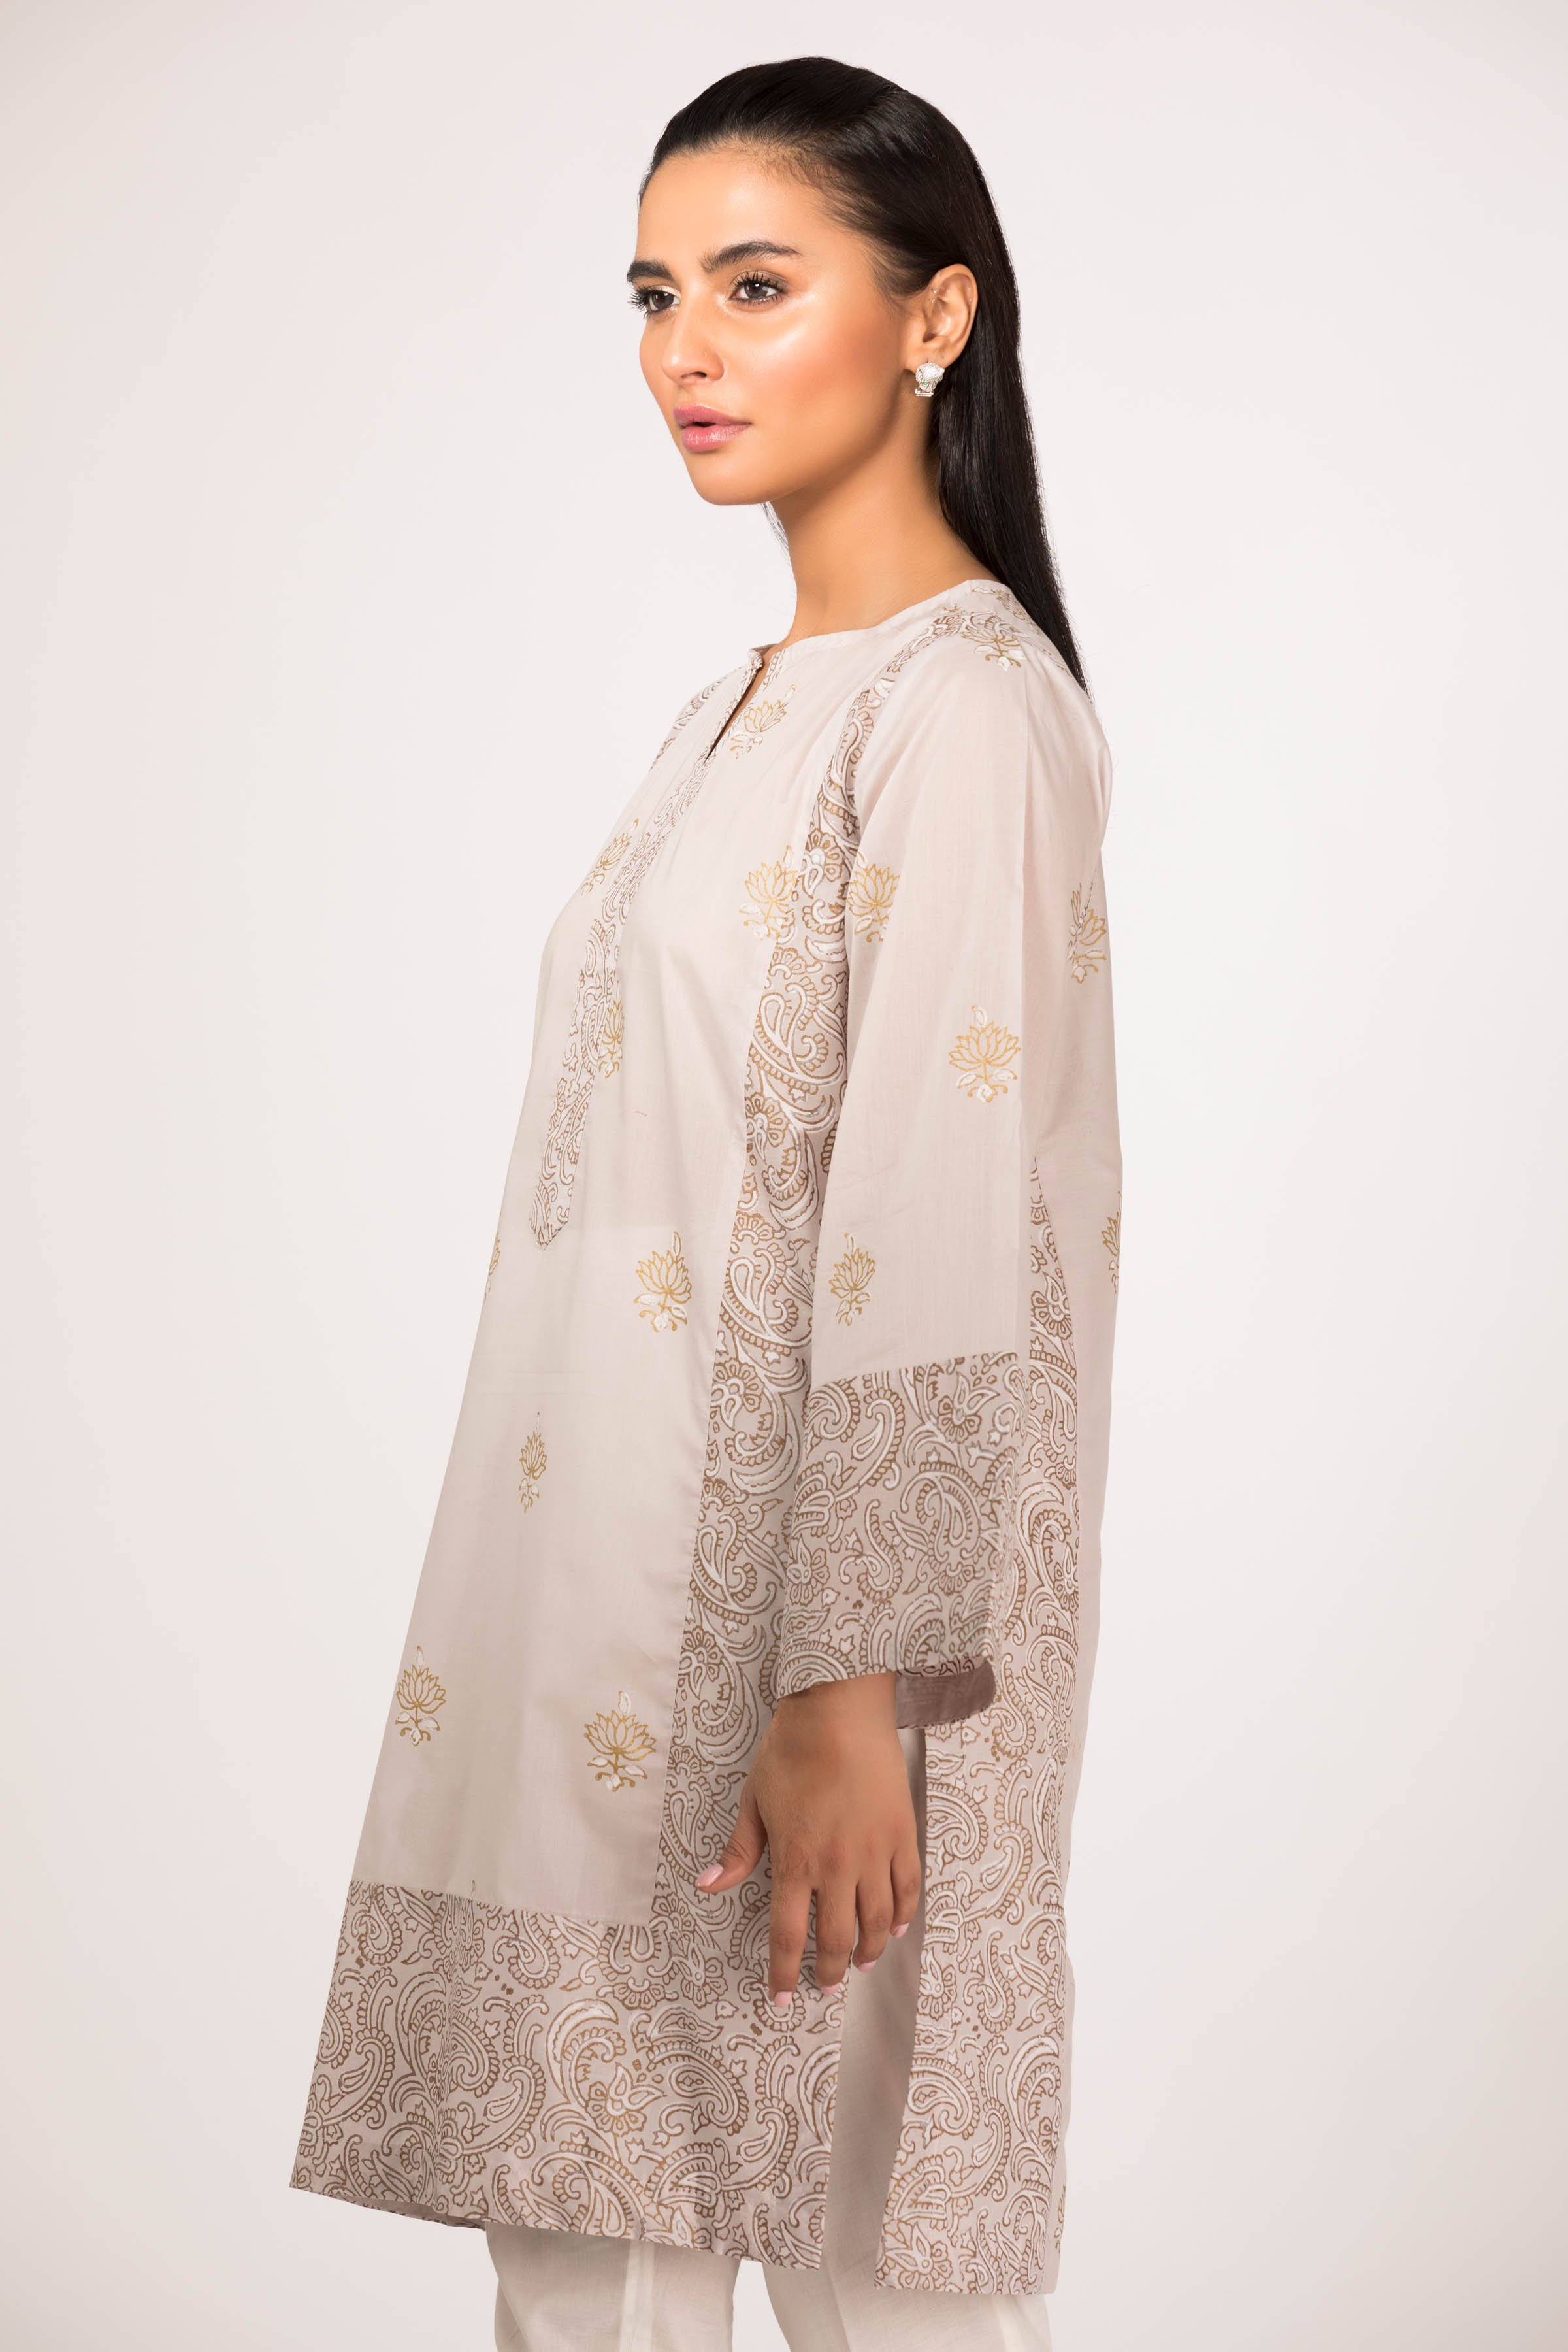 A pretty and stylish Pakistani dress in USA by Sapphire available online